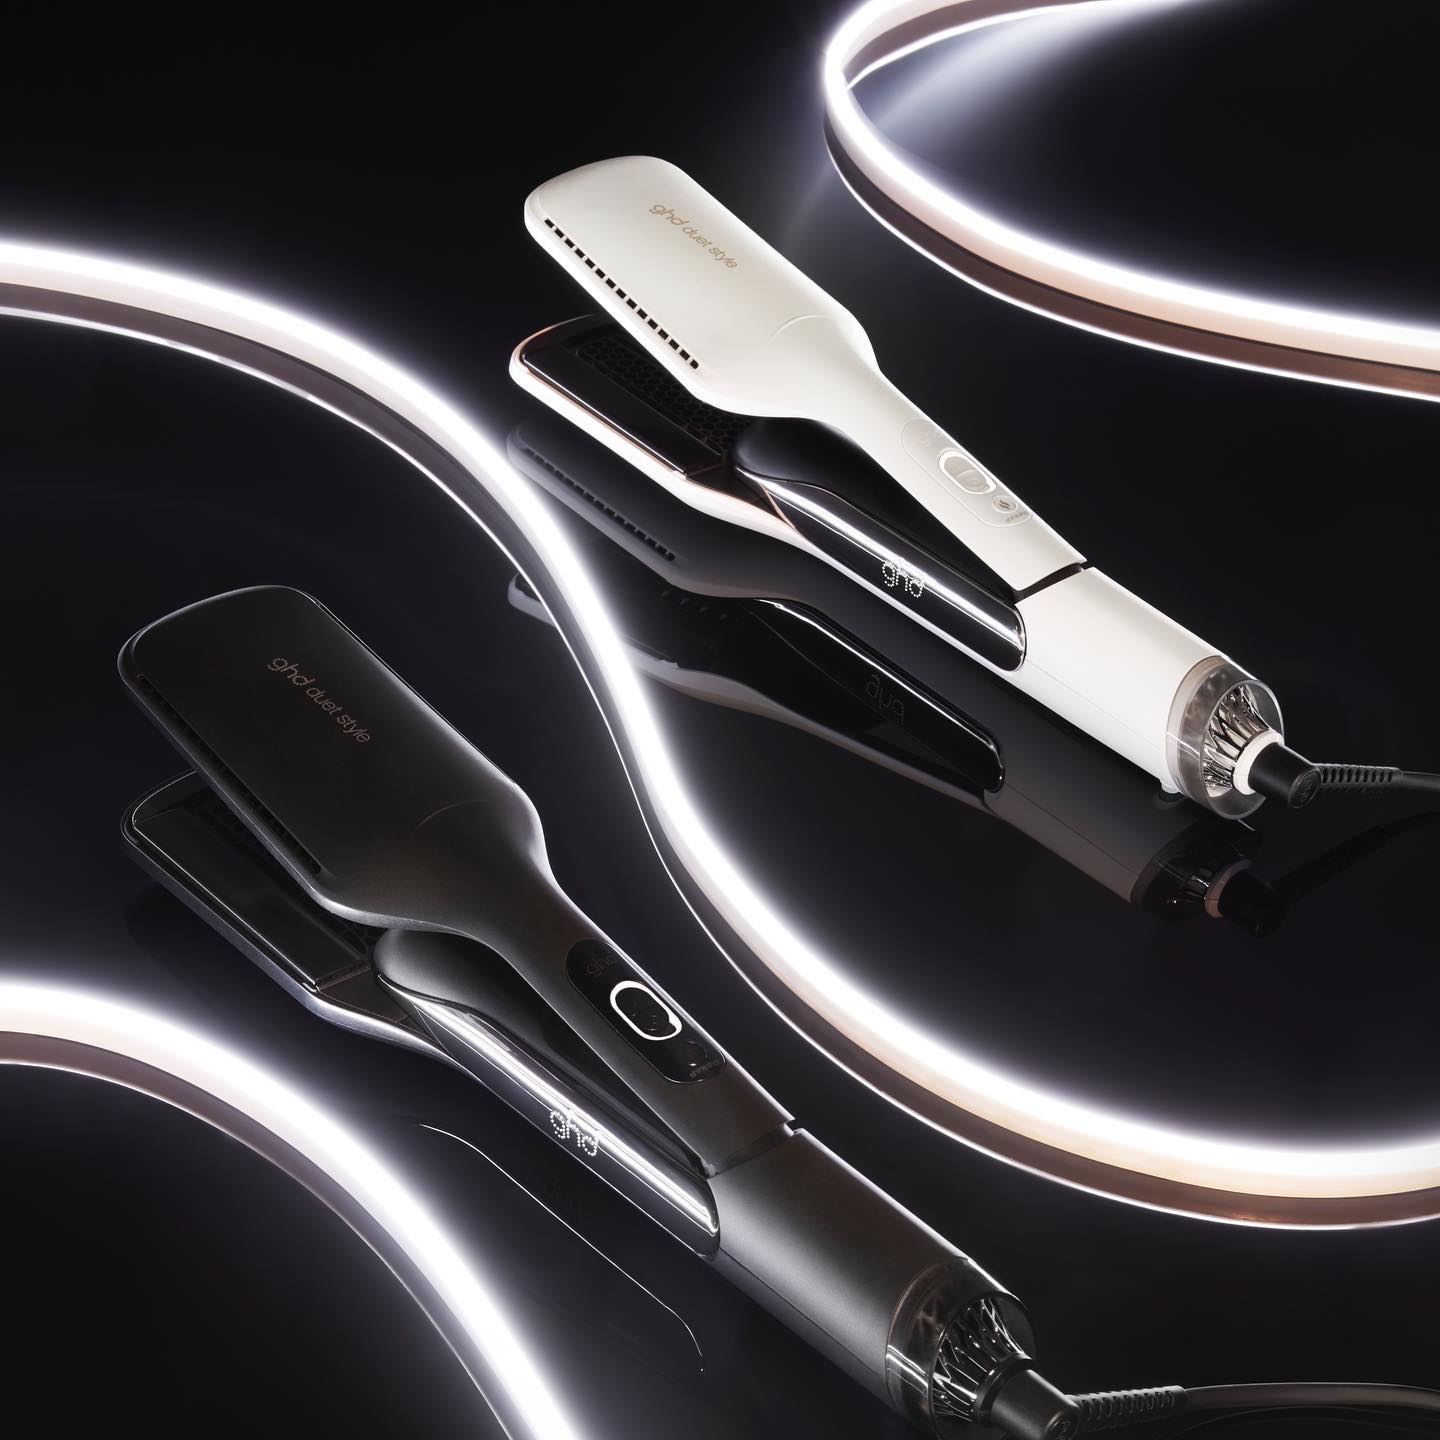 Introducing the ghd Duet Style